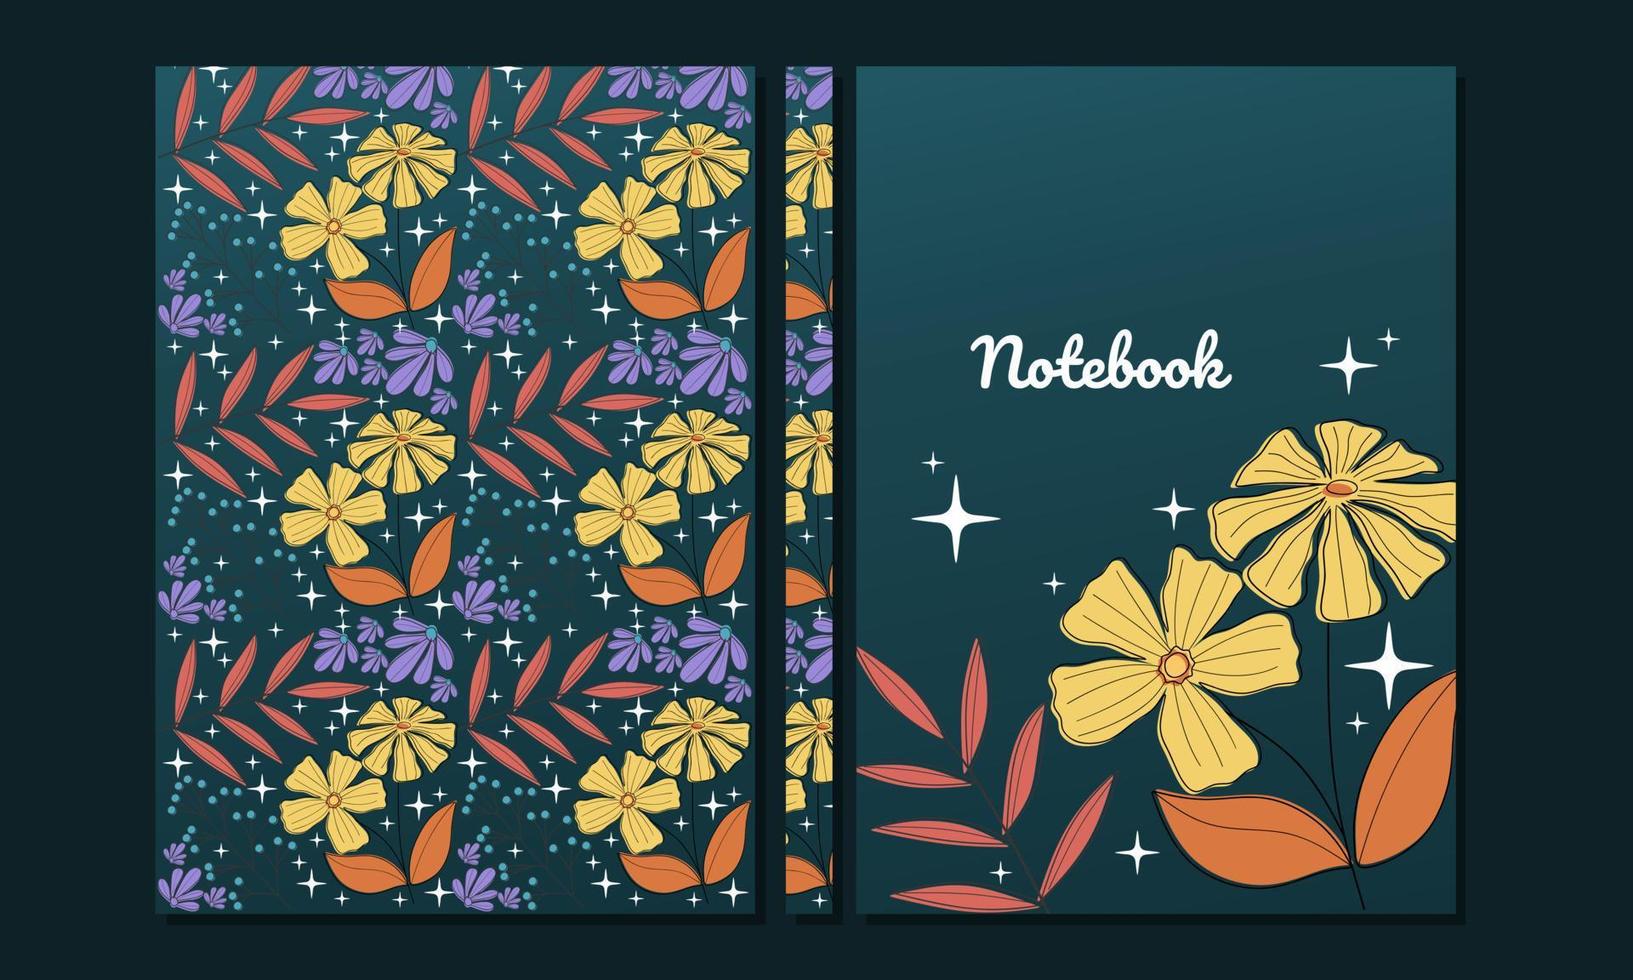 Cover page templates. abstract and floral design. Seamless pattern. Applicable for notebooks, planners, brochures, books, catalogs. vector